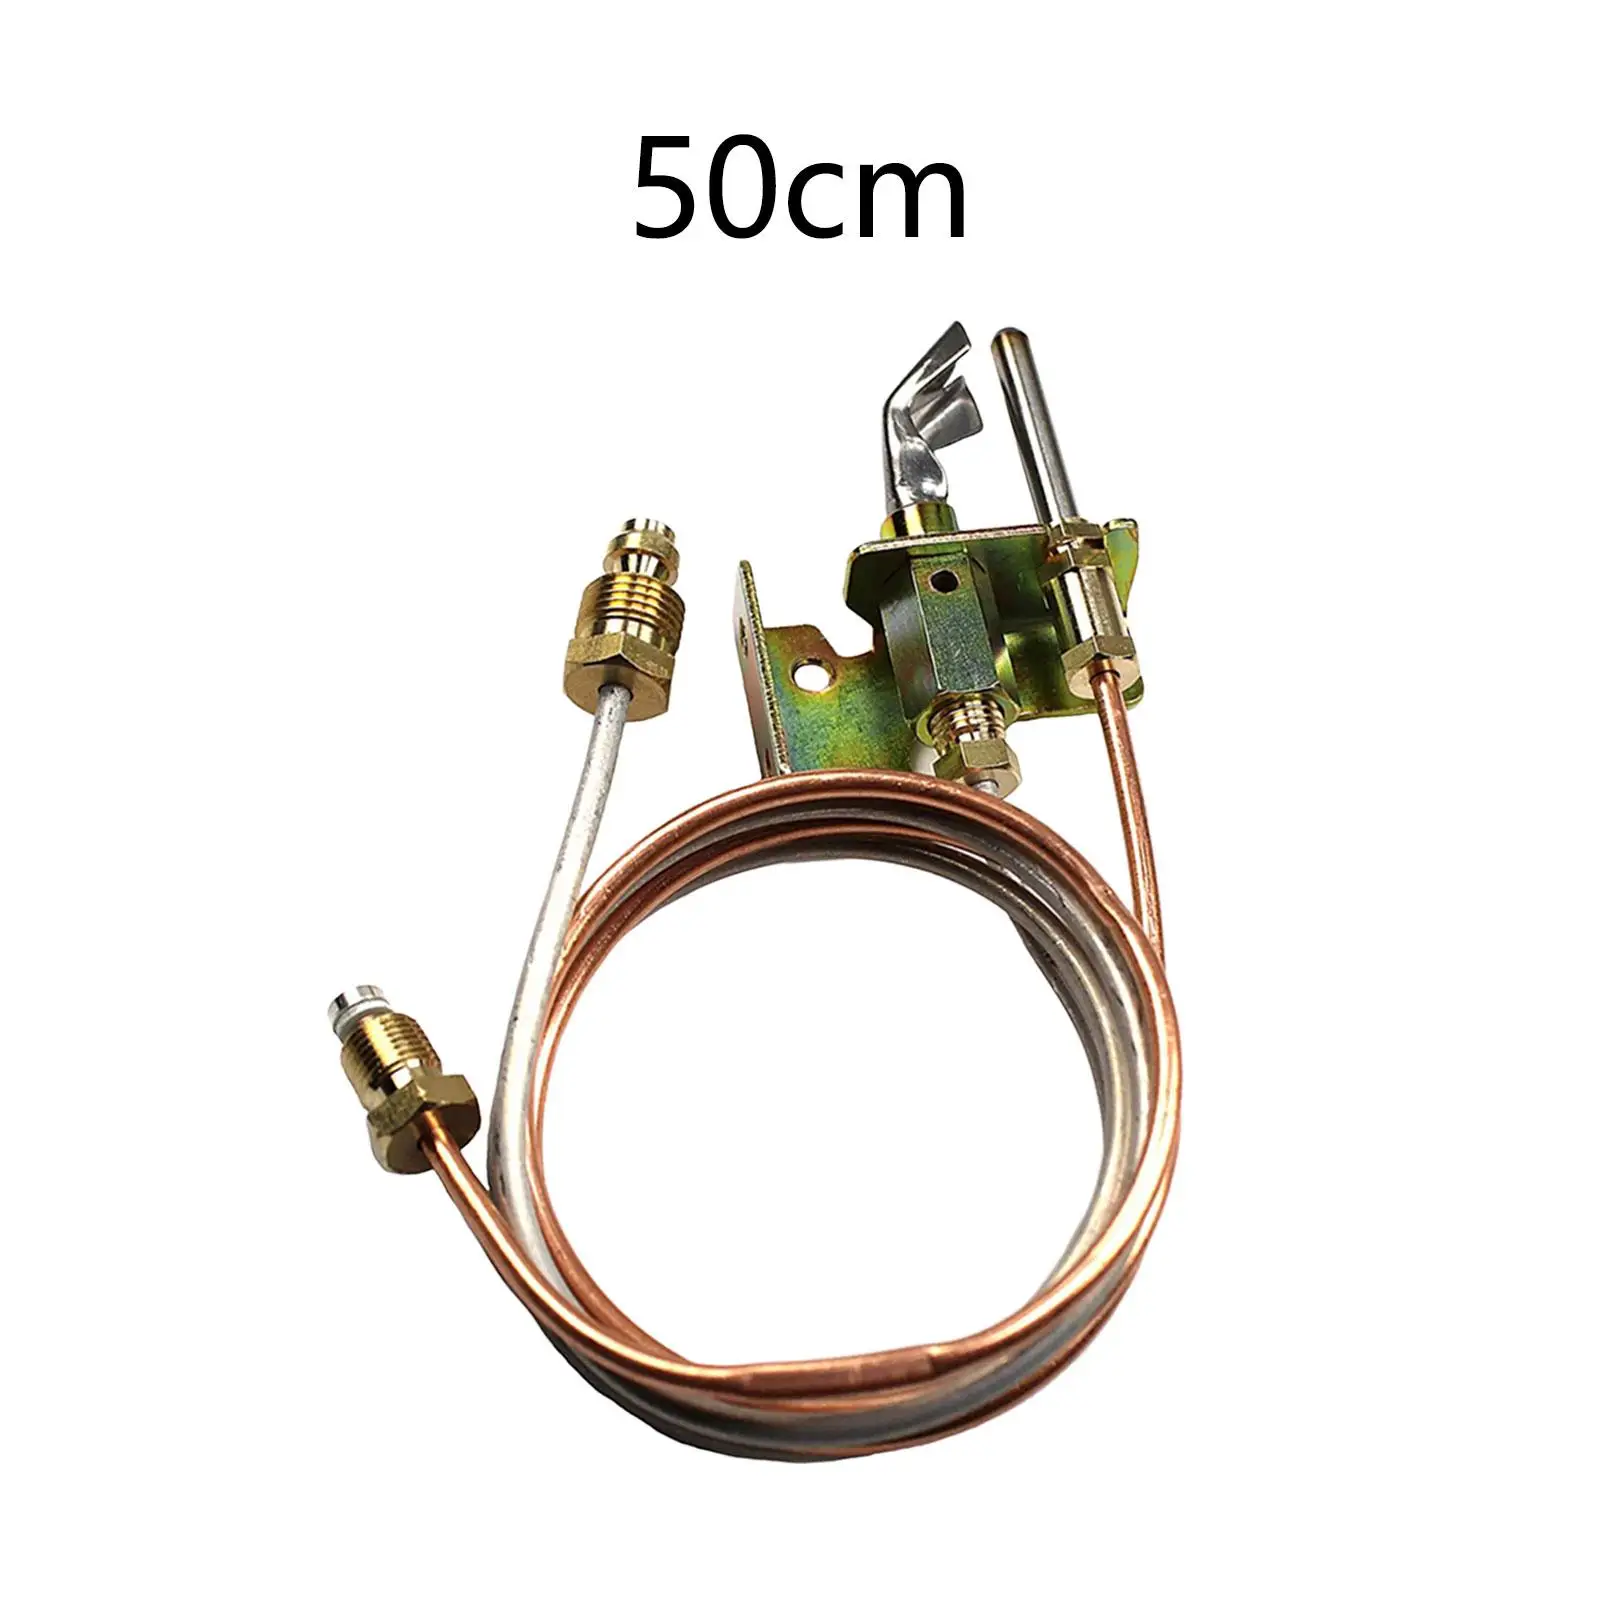 Heater Pilots Assembly Heater Thermopile Pilots Thermocouple And Tubing Water Heater Pilots Assembely Replacement Parts